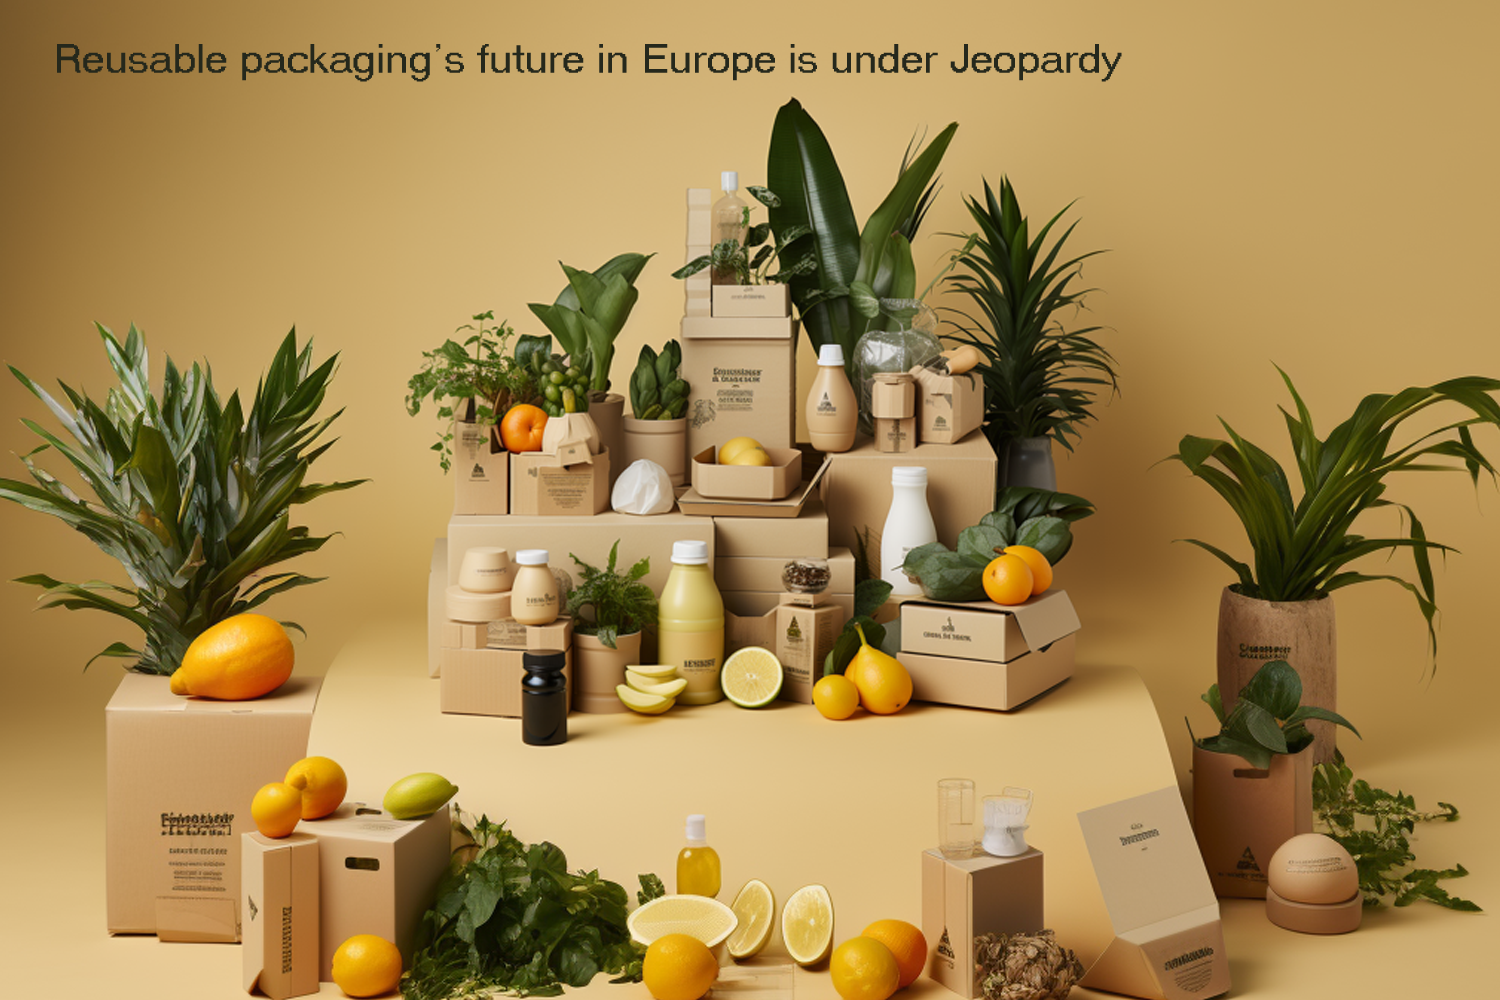 Reusable packaging’s future in Europe is under Jeopardy